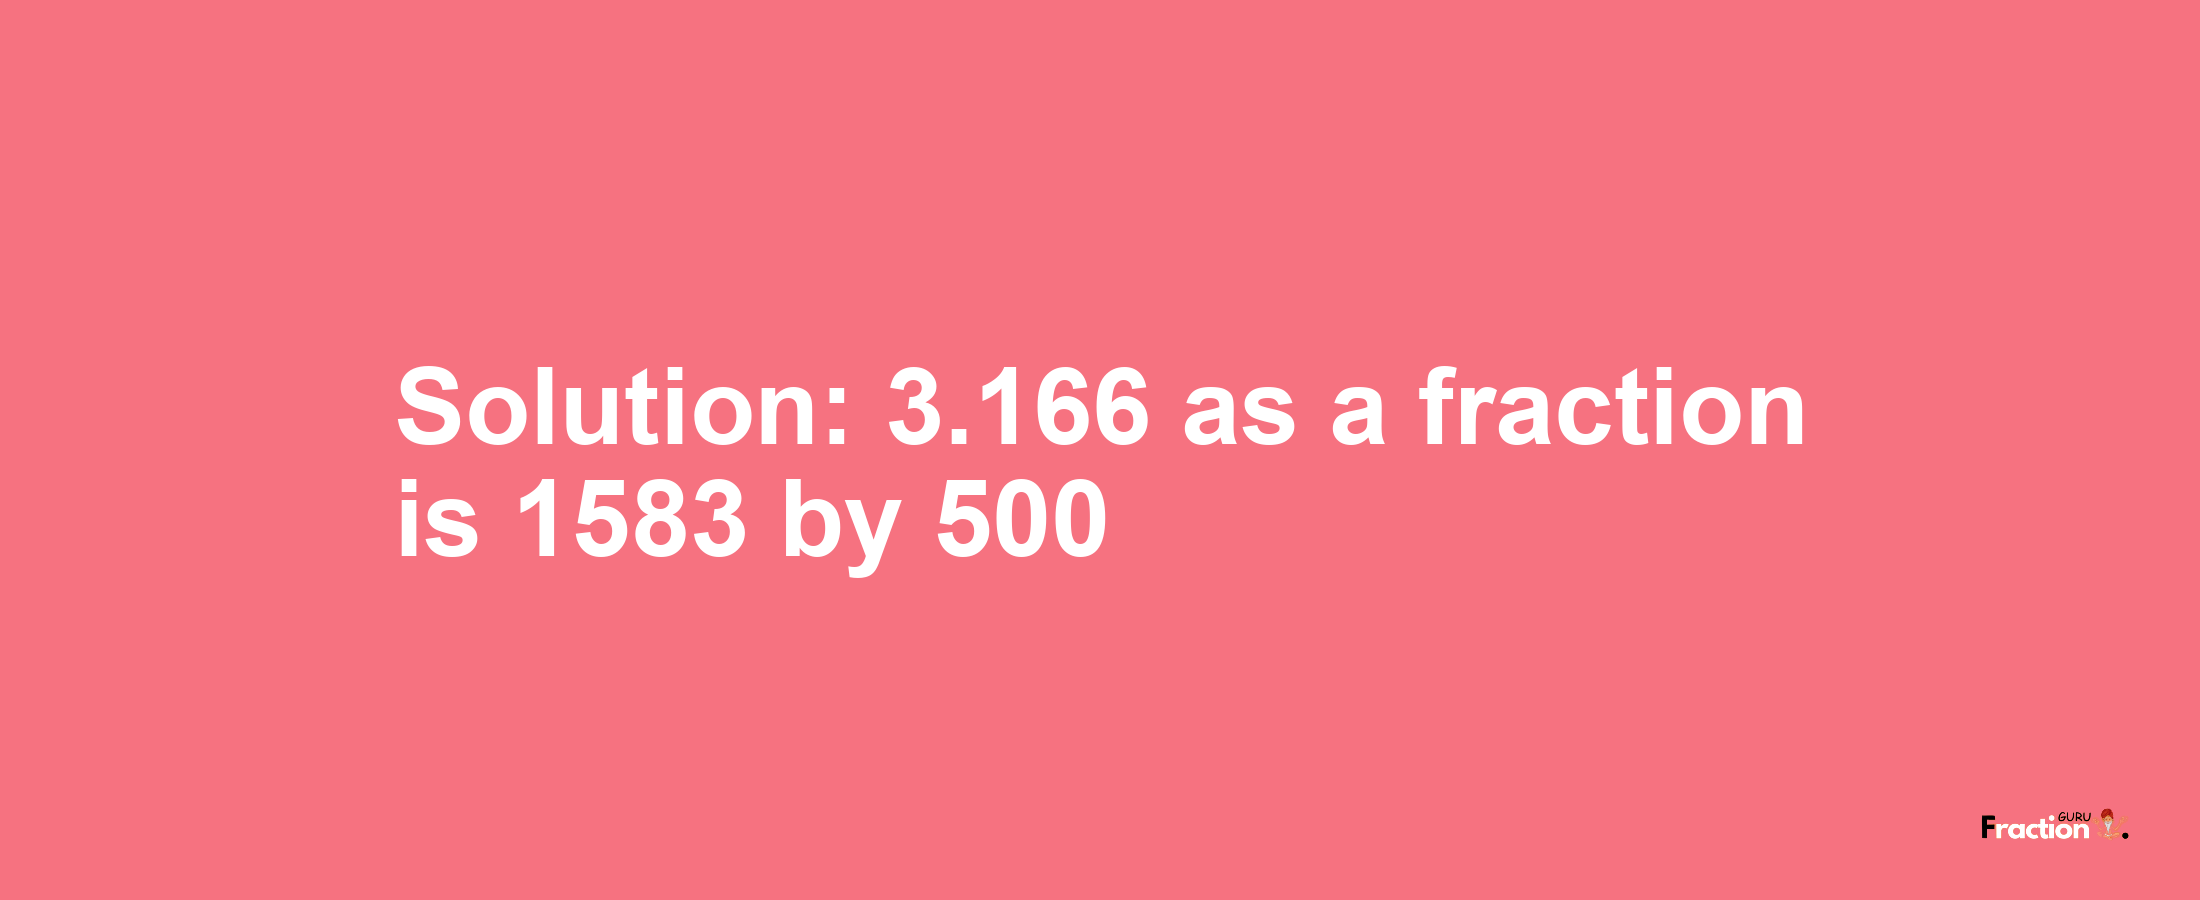 Solution:3.166 as a fraction is 1583/500